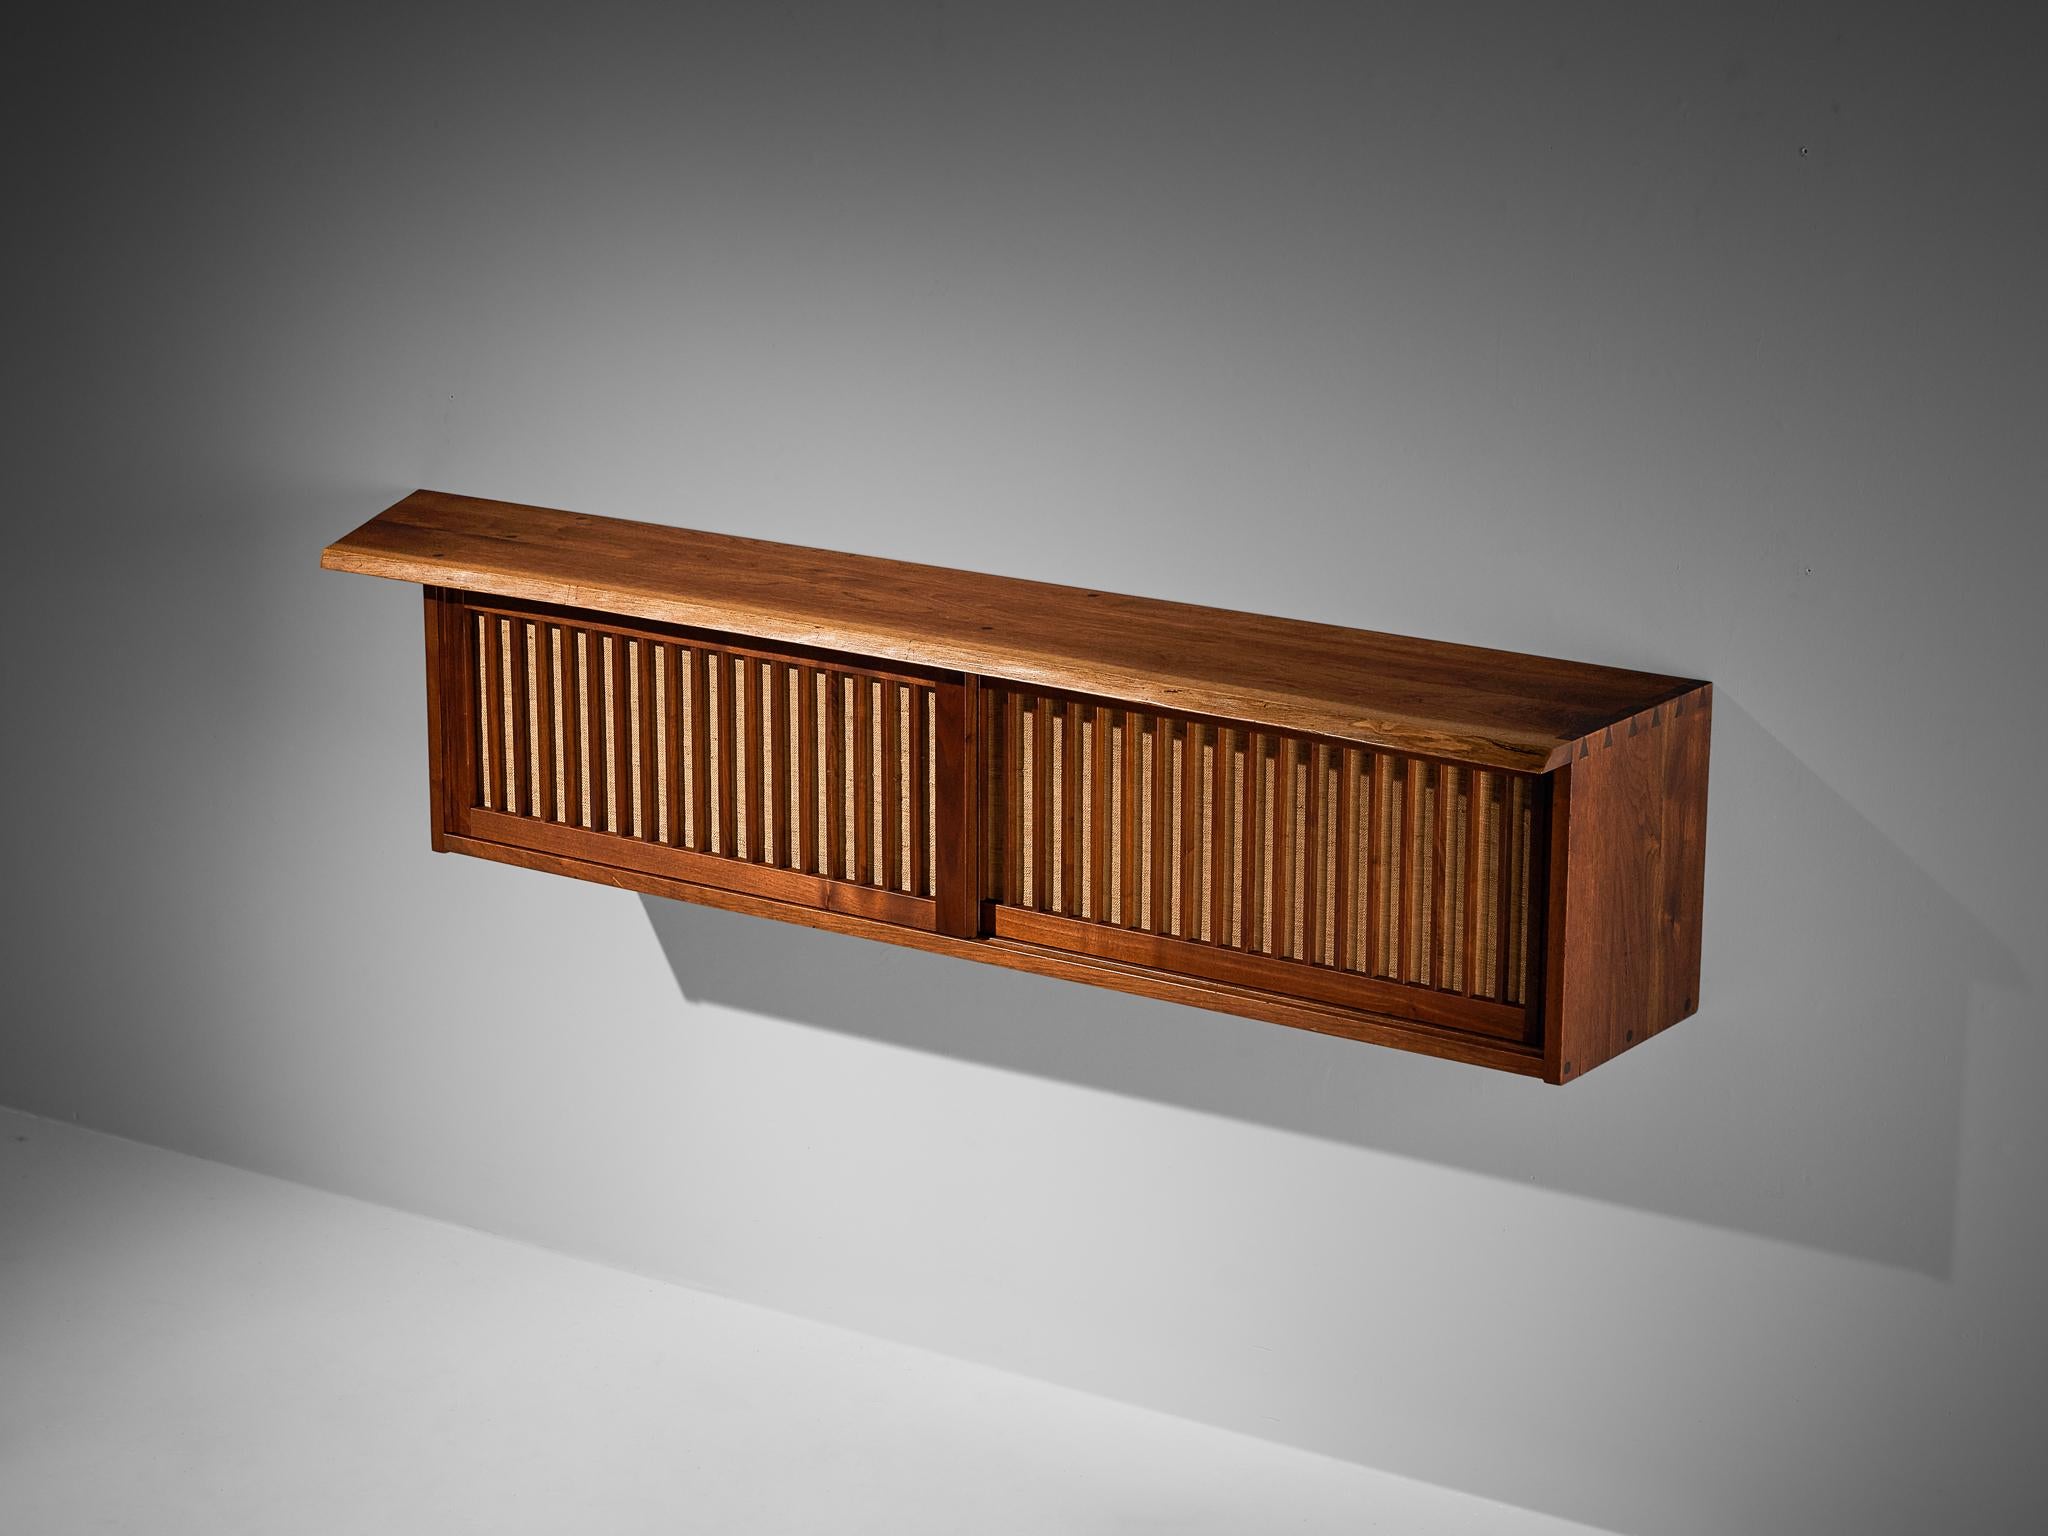 George Nakashima, sliding-door wall-mounted cabinet, American black walnut, pandanus cloth, United States, 1963

With regard to its essential form, material use, and woodwork, this sliding-door wall-mounted cabinet is a testimony to George